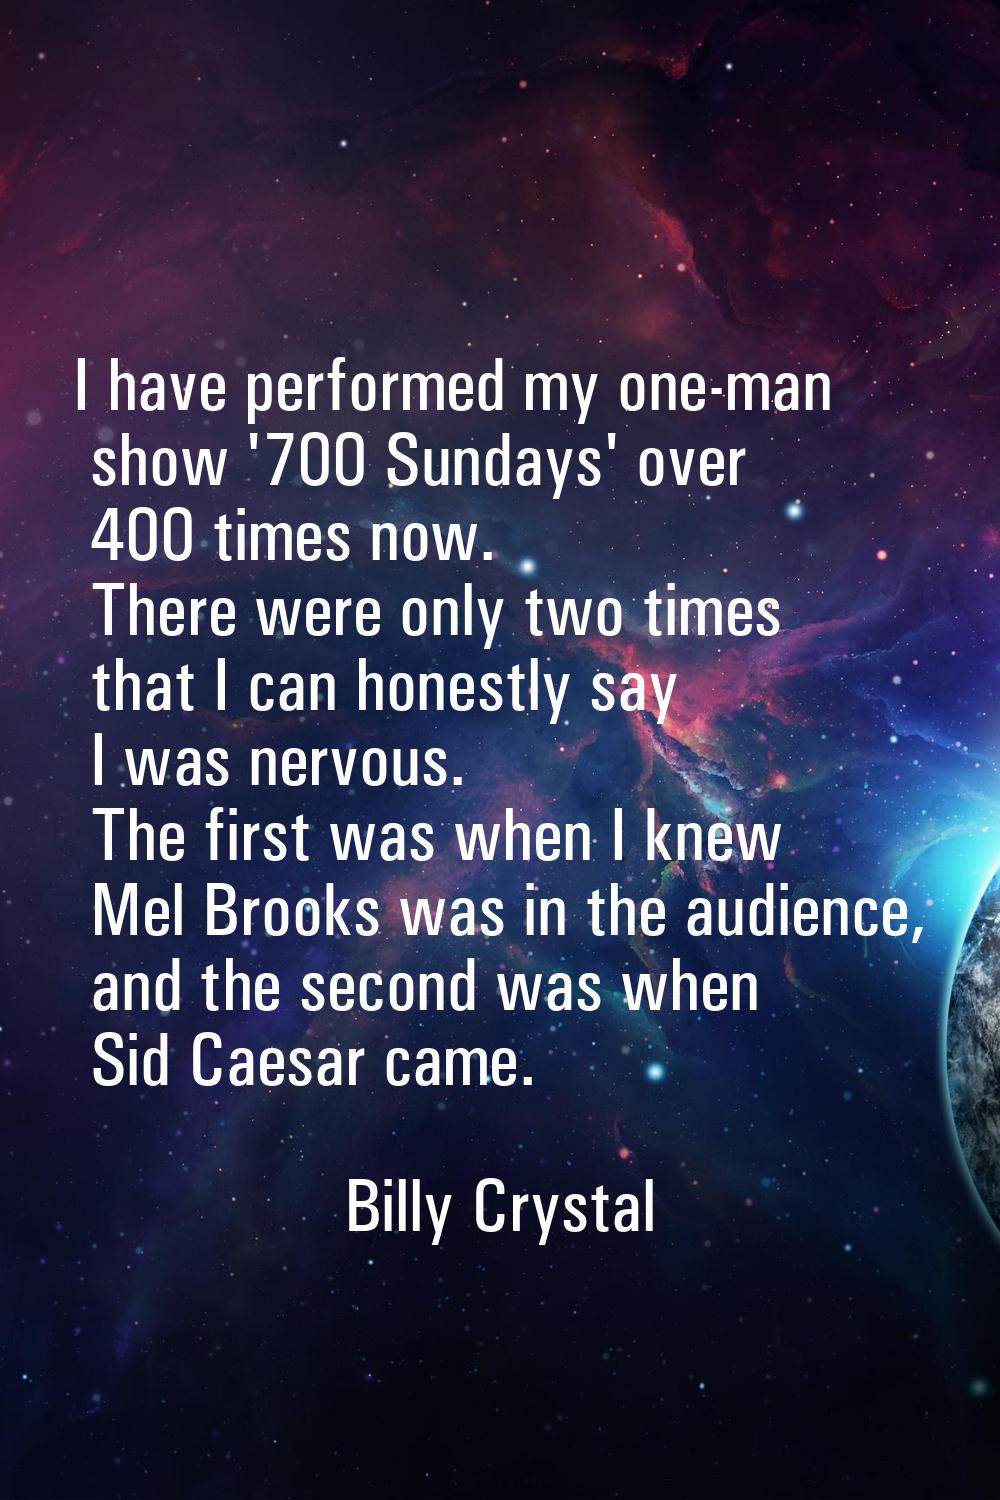 I have performed my one-man show '700 Sundays' over 400 times now. There were only two times that I